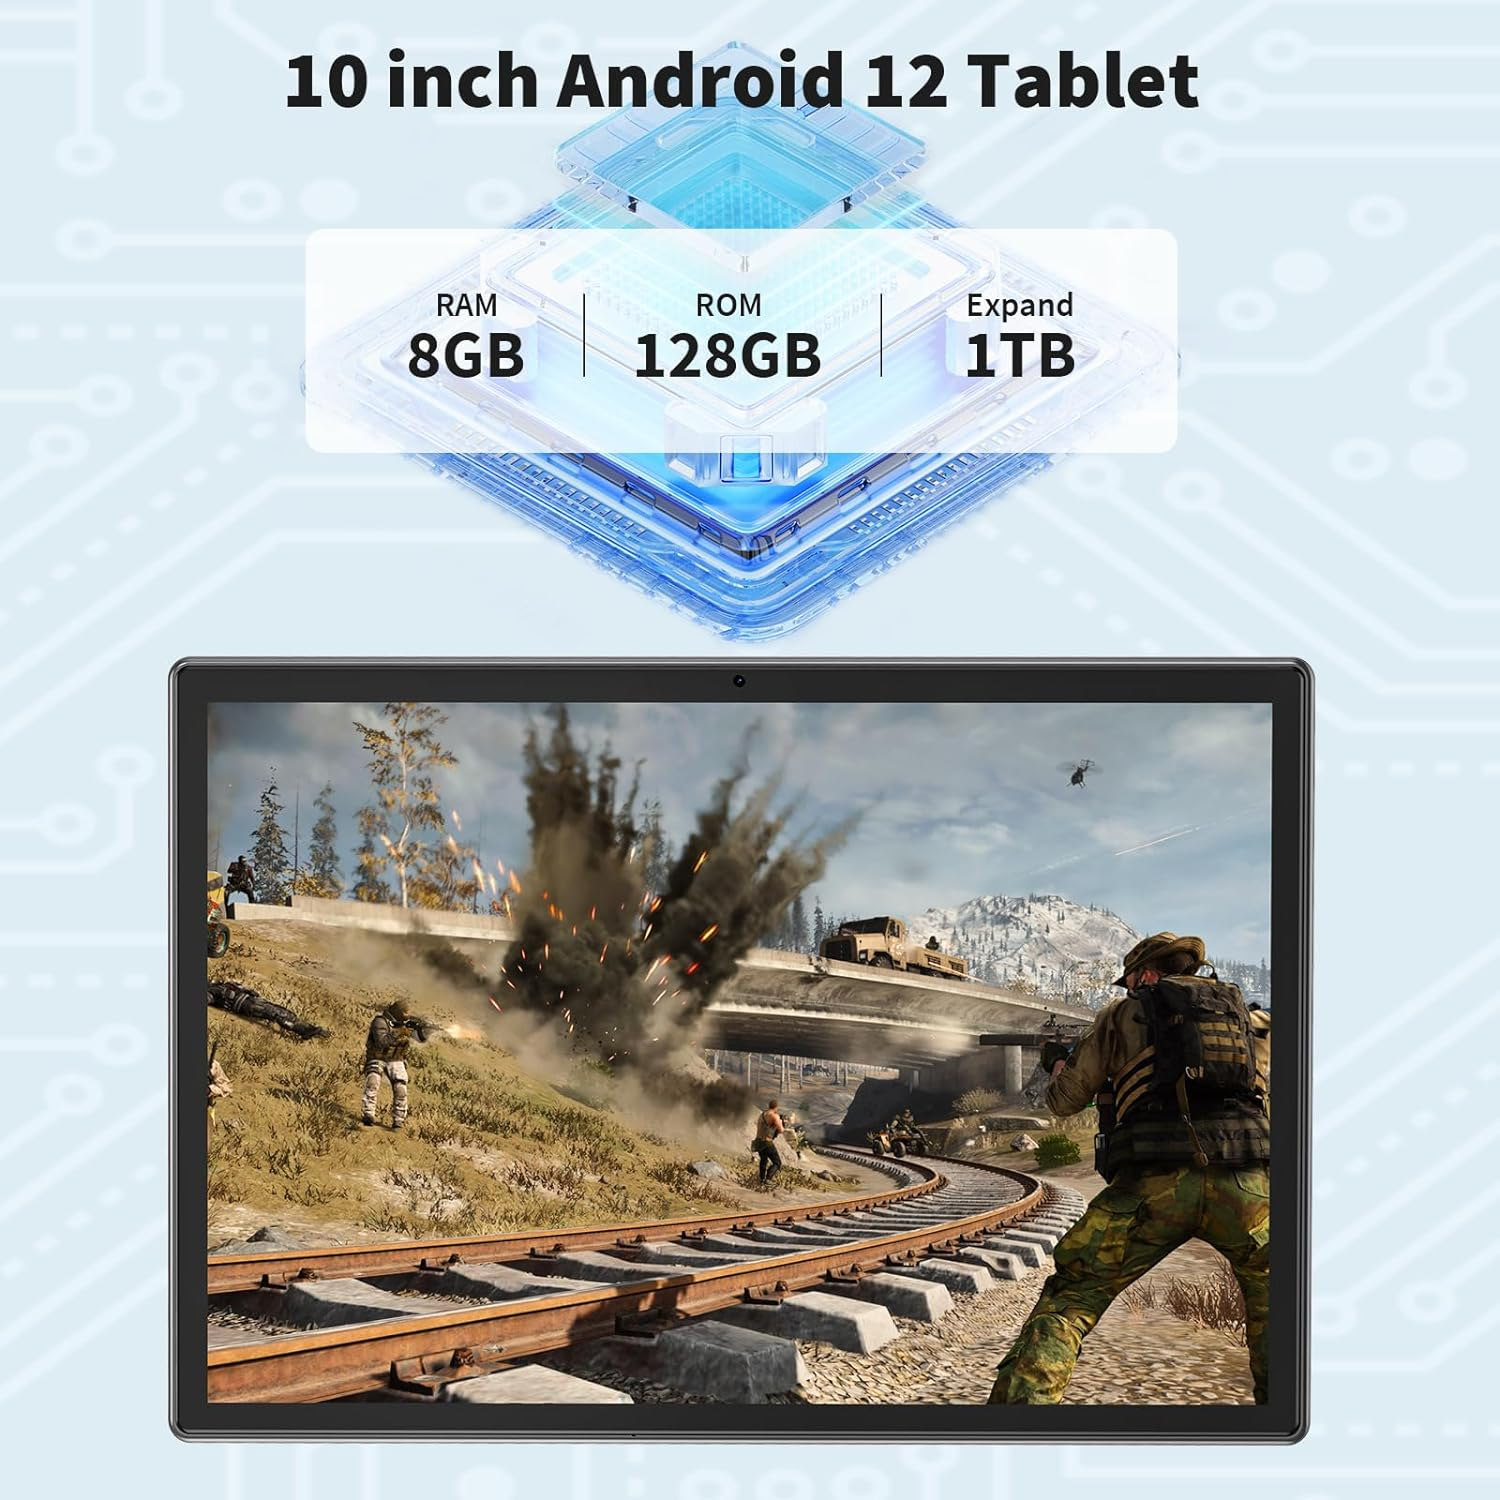 Android Tablet, 10 Inch Android 12 Tablet, 8GB RAM 128GB ROM, 1TB Expand, Android Tablet with 5G WiFi, 4G/LTE, 8000 mAh Battery, Bluetooth 5.0, FHD IPS Touch Screen, Dual Camera, GPS, GMS Certified